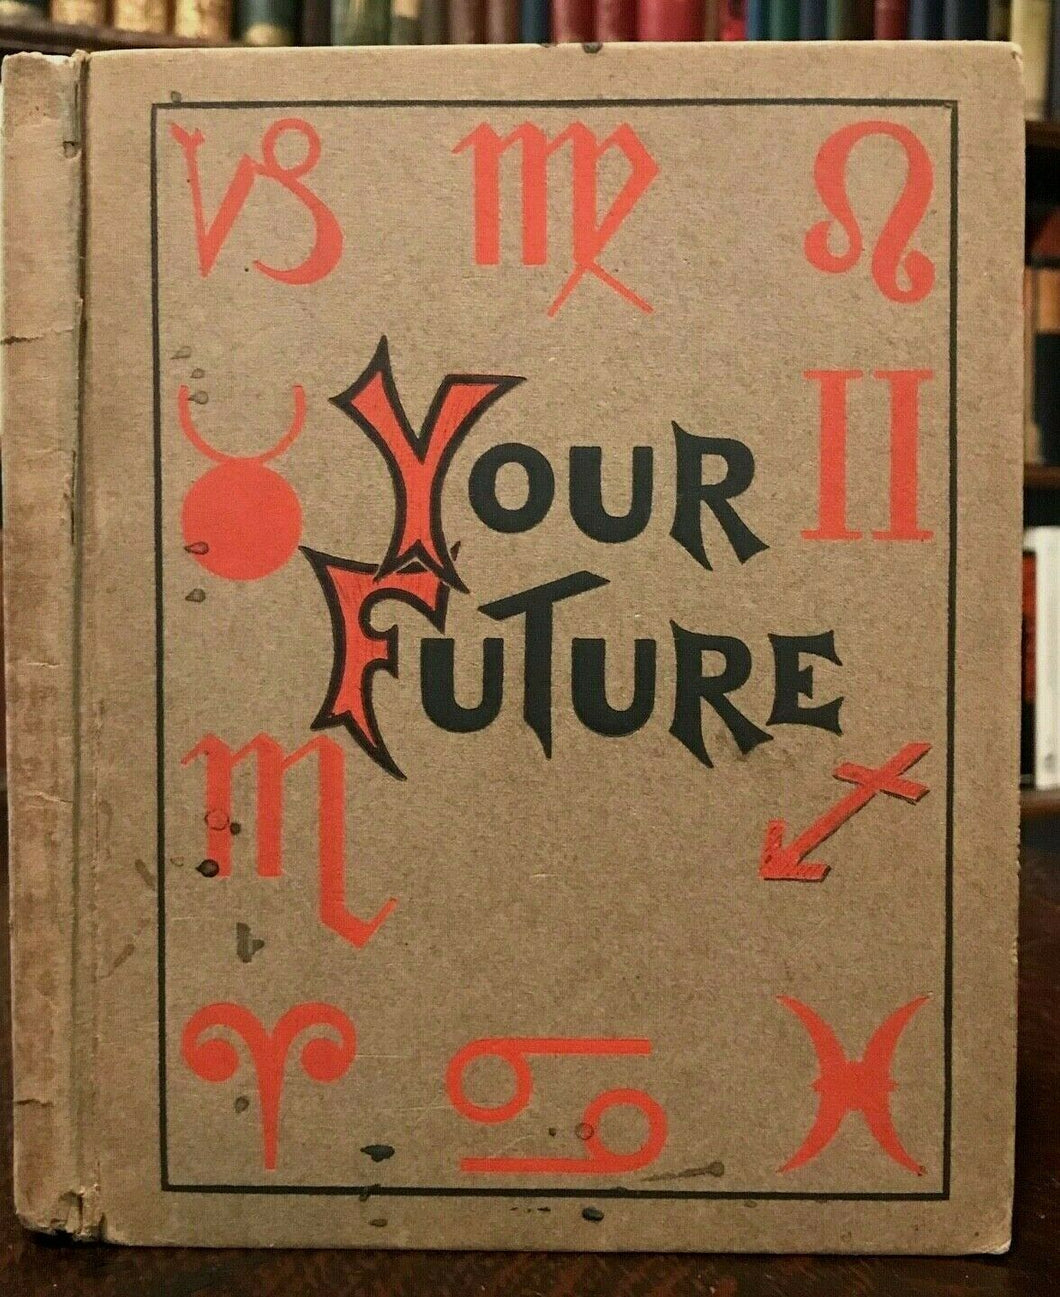 1906 YOUR FUTURE: ZODIAC'S GUIDE TO SUCCESS IN LIFE - ASTROLOGY DIVINATION SIGNS